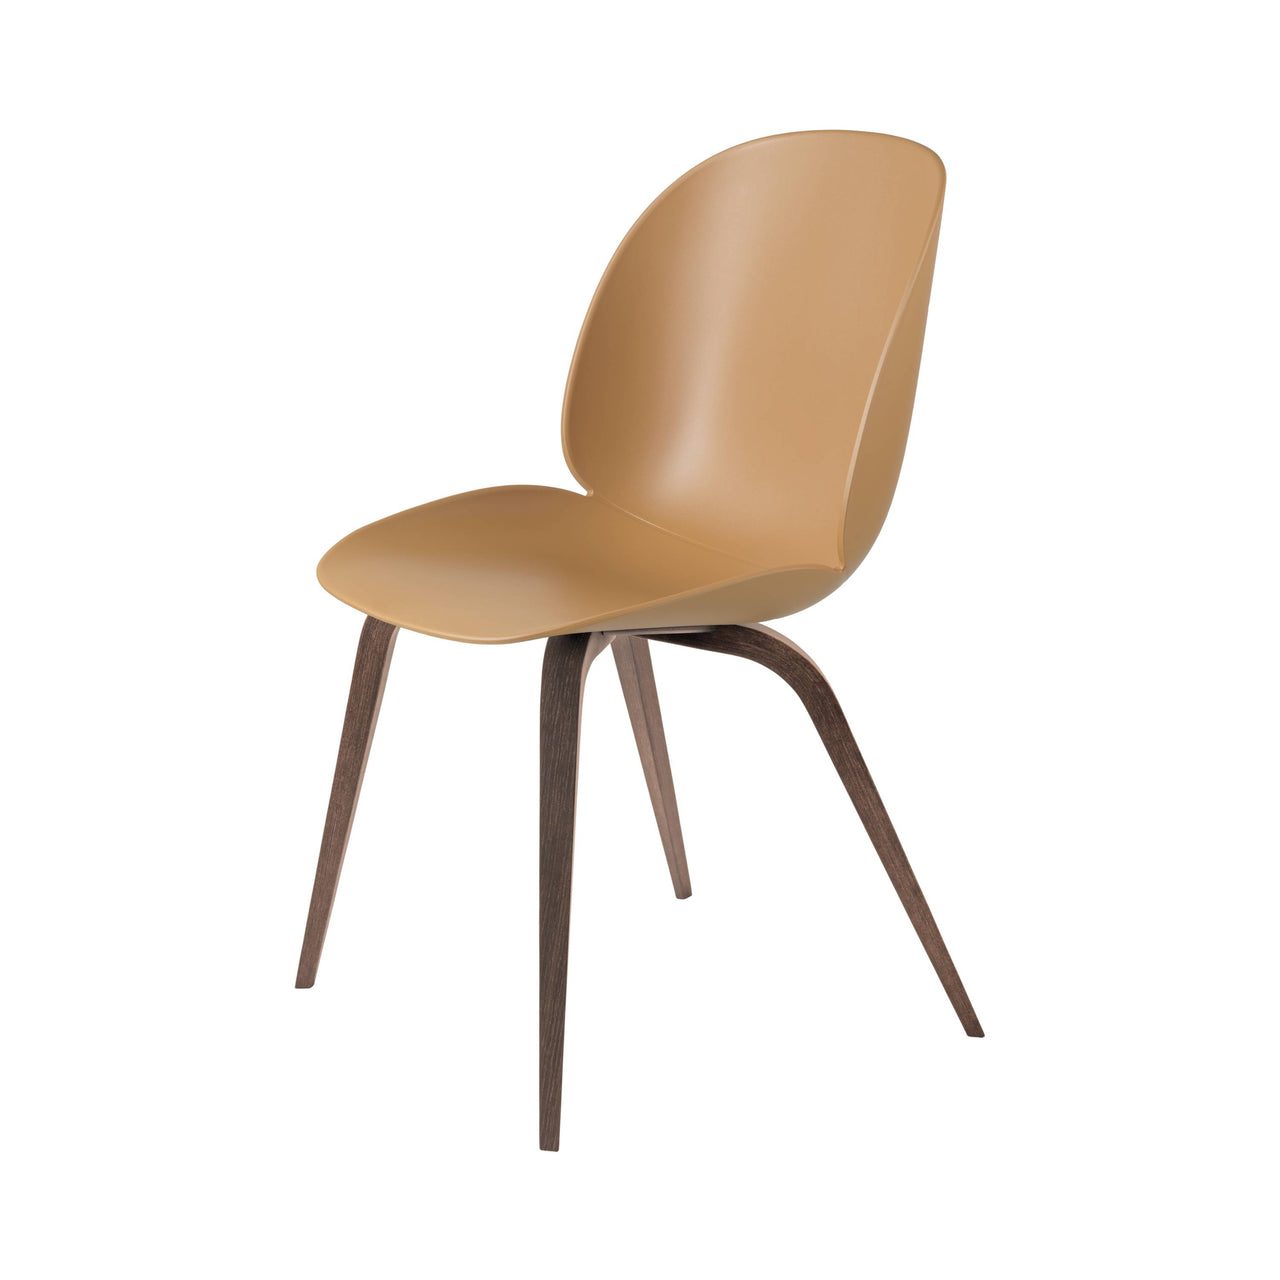 Beetle Dining Chair: Wood Base + Amber Brown + American Walnut + Plastic Glides